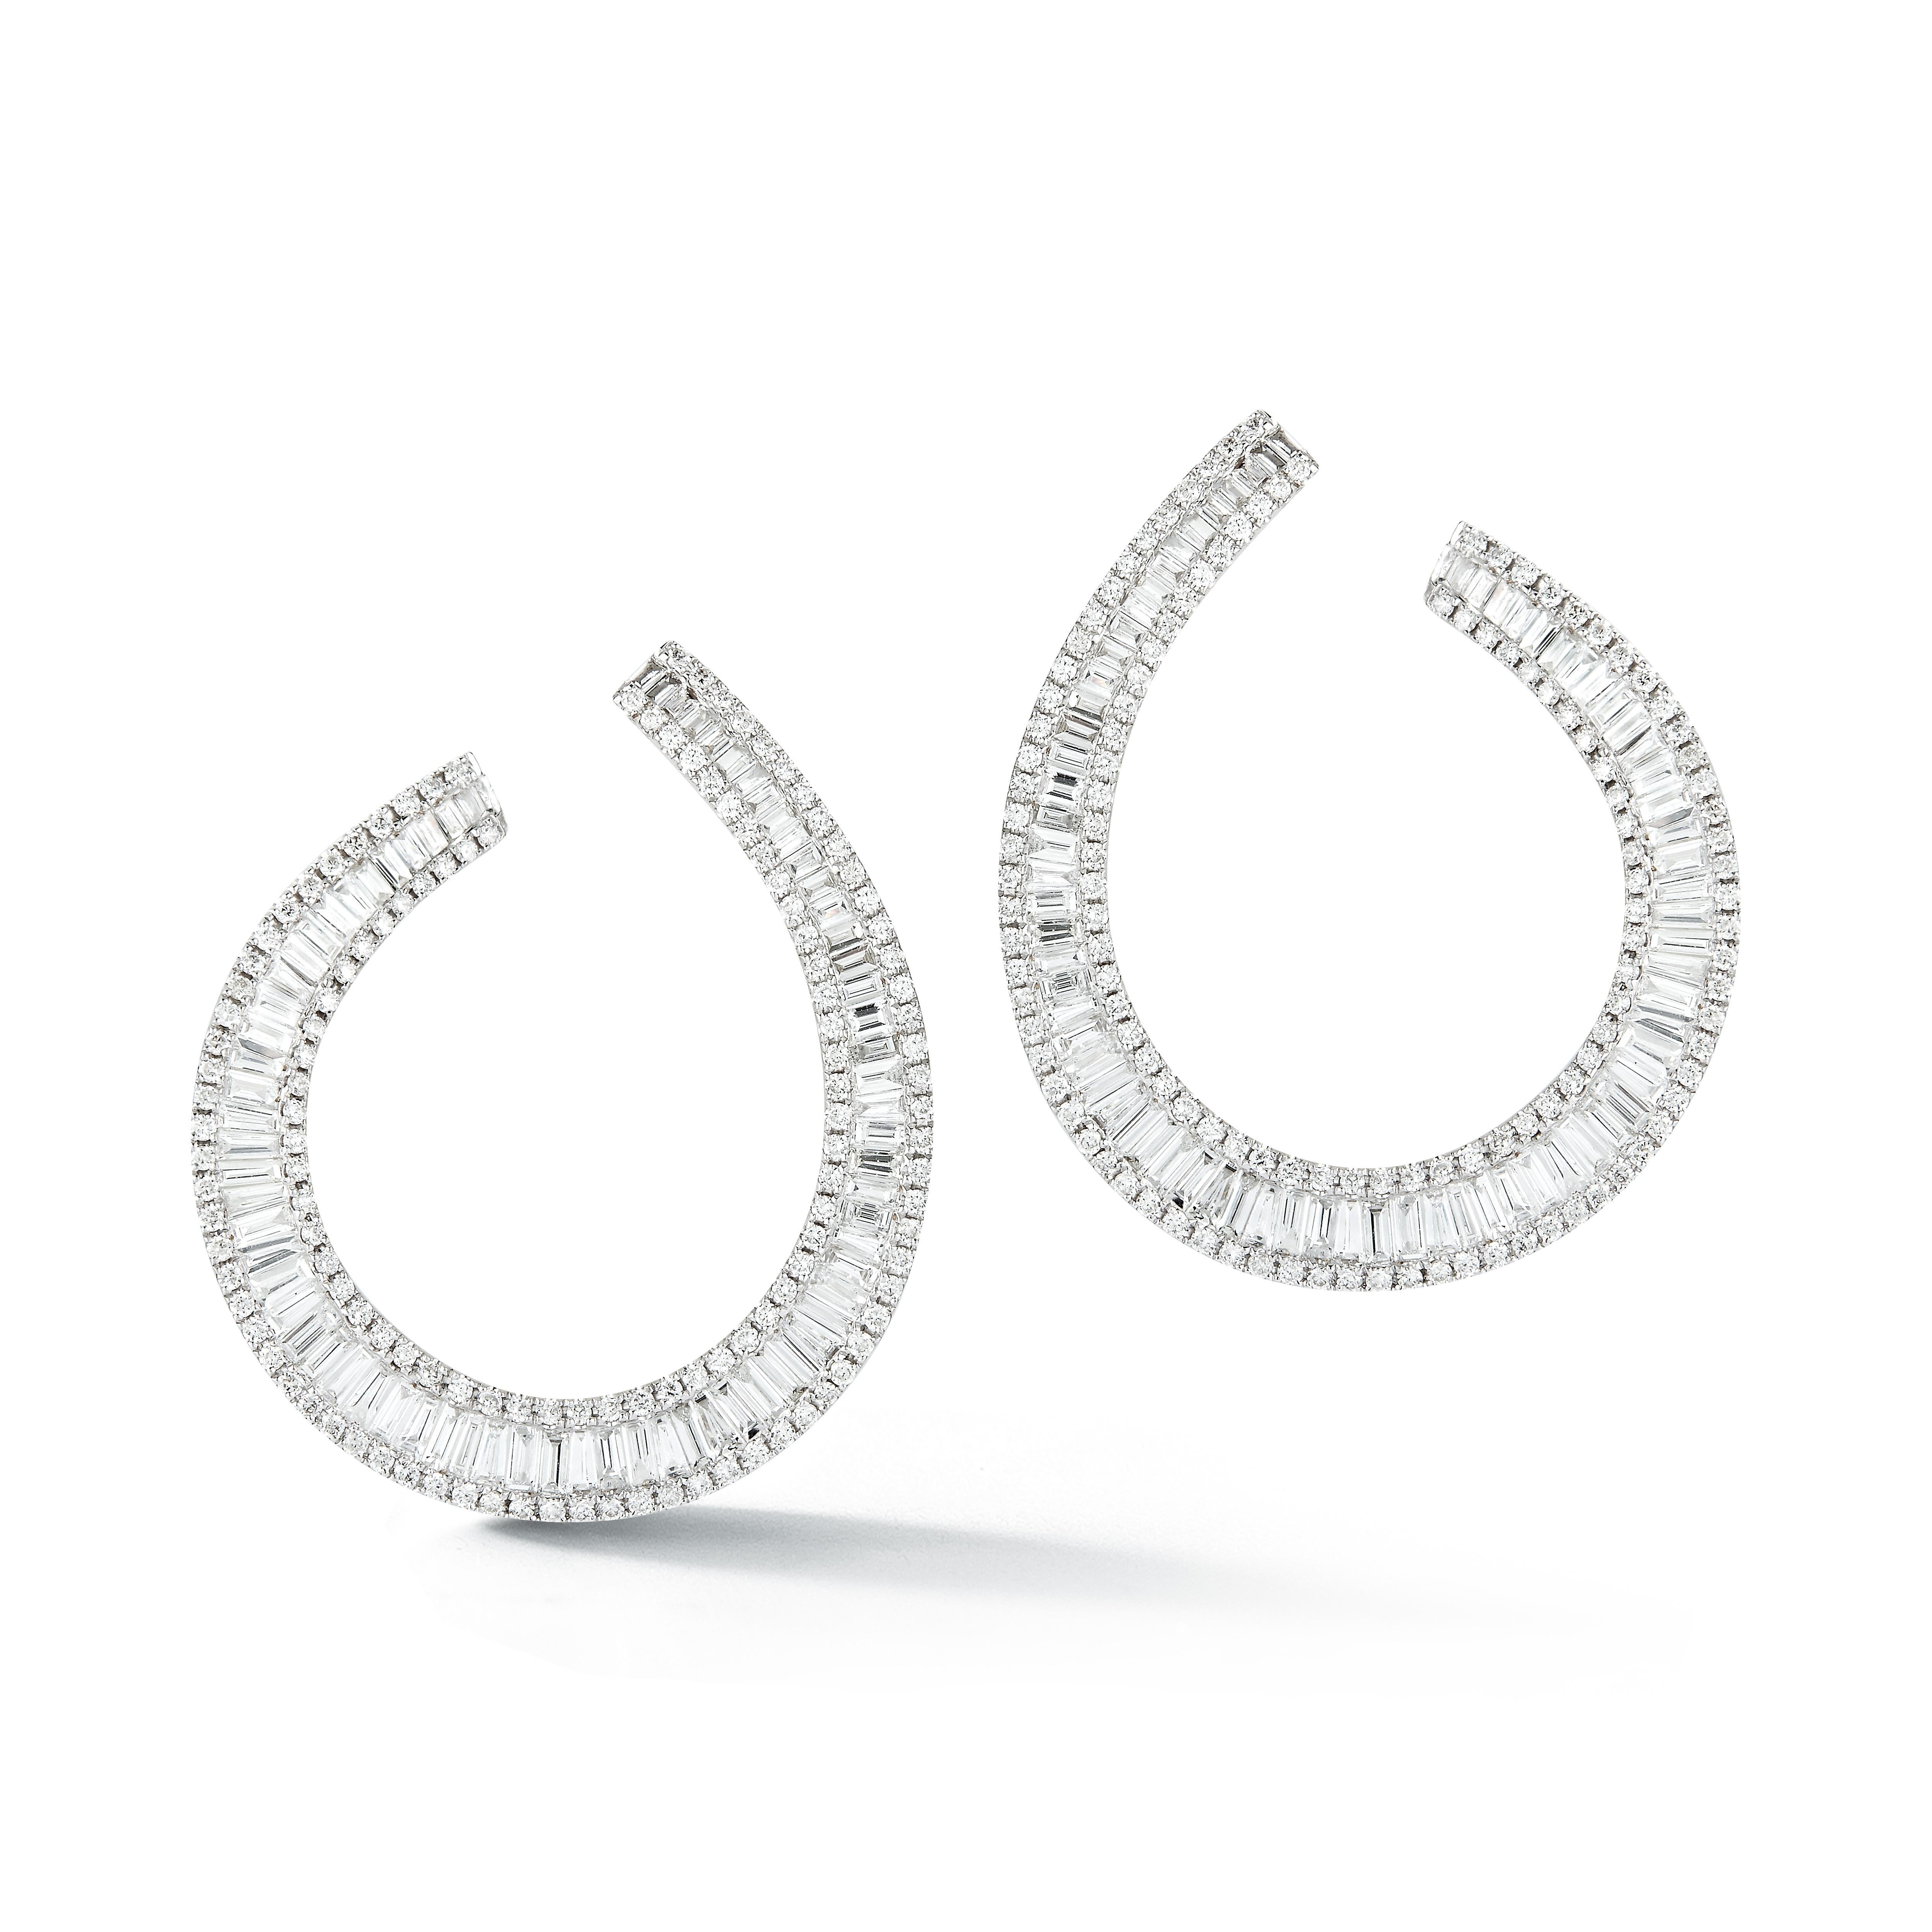 Beautiful 18K White Gold Earrings in unusual Modern Flat-Hoop design containing 260 White Round Diamonds weighing 1.15 Carats and 144 White Baguette Diamonds weighing 2.34 Carats.